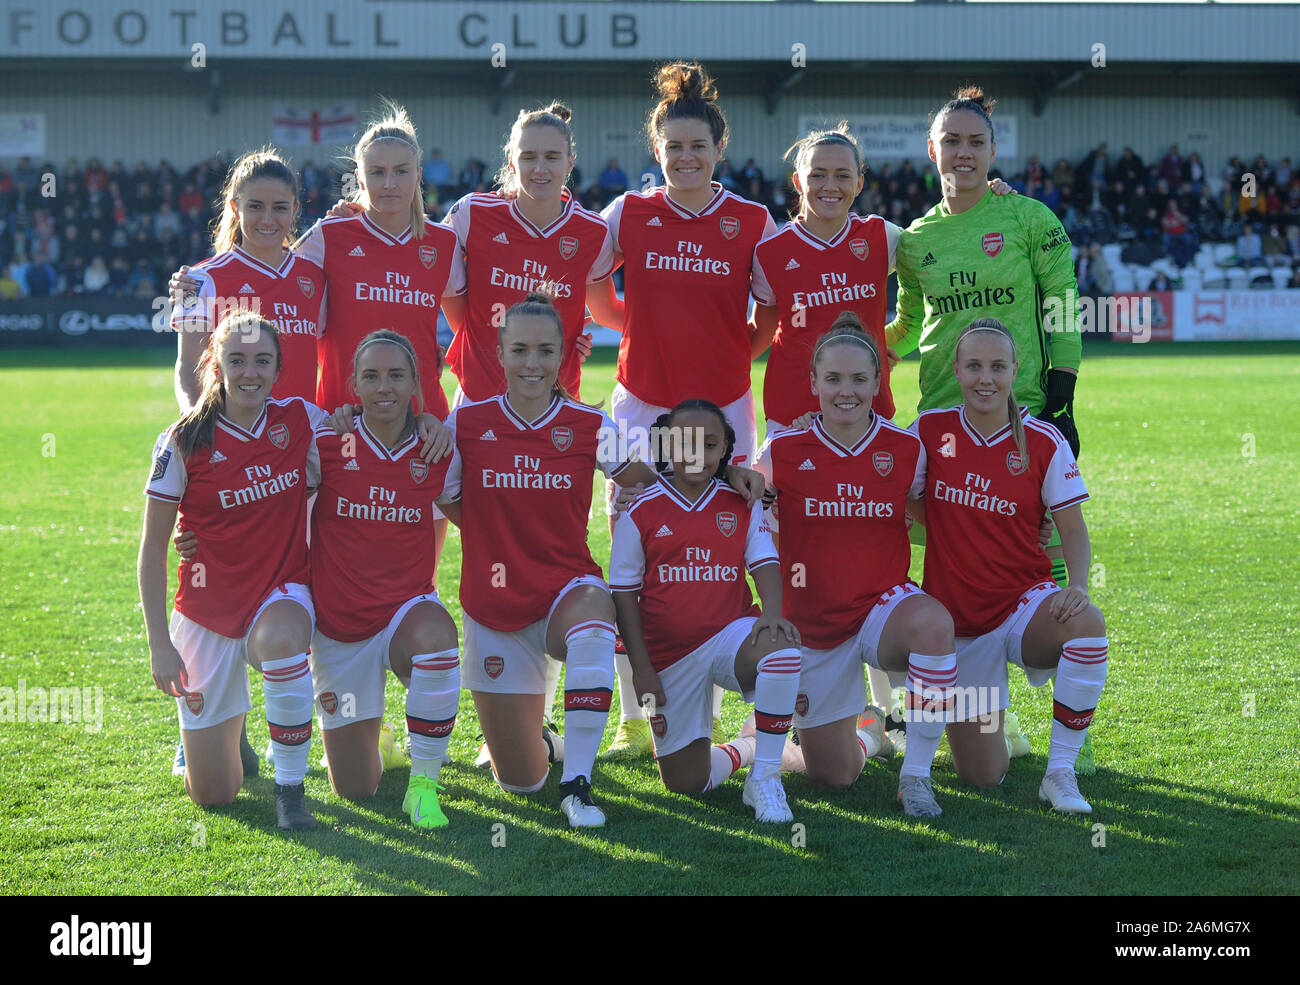 Borehamwood, UK. 27th Oct, 2019. of Arsenal Women and of Manchester City Women in action during the Barclays FA Women's Super League match between Arsenal Women and Manchester City Women at the Meadow Park in Borehamwood, UK - 27th October 2019 Credit: Action Foto Sport/Alamy Live News Stock Photo